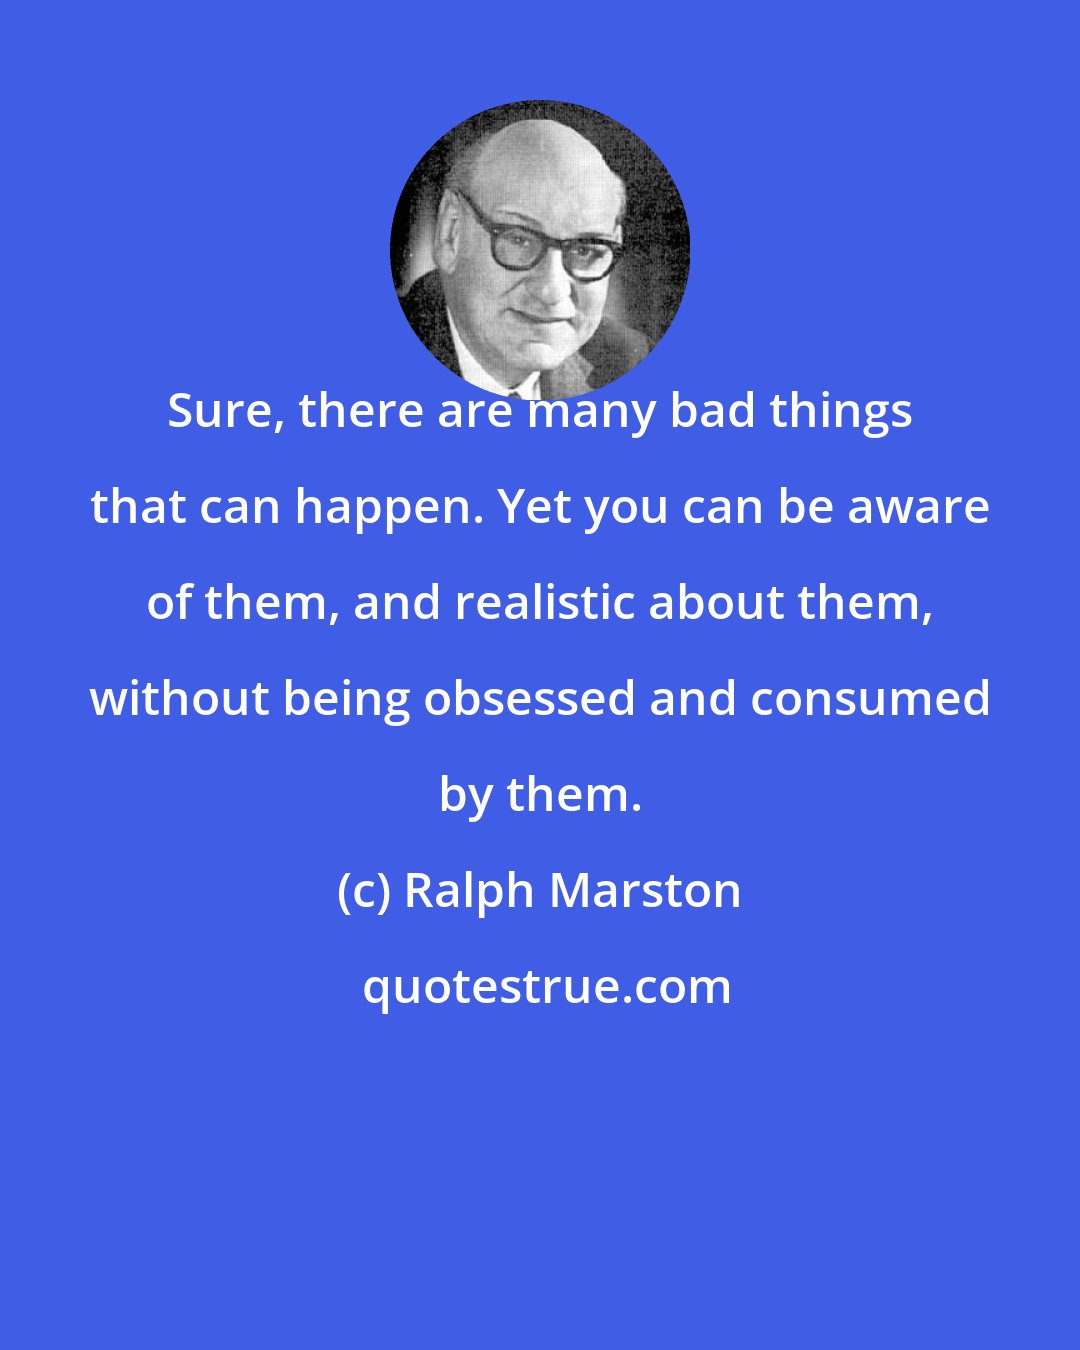 Ralph Marston: Sure, there are many bad things that can happen. Yet you can be aware of them, and realistic about them, without being obsessed and consumed by them.